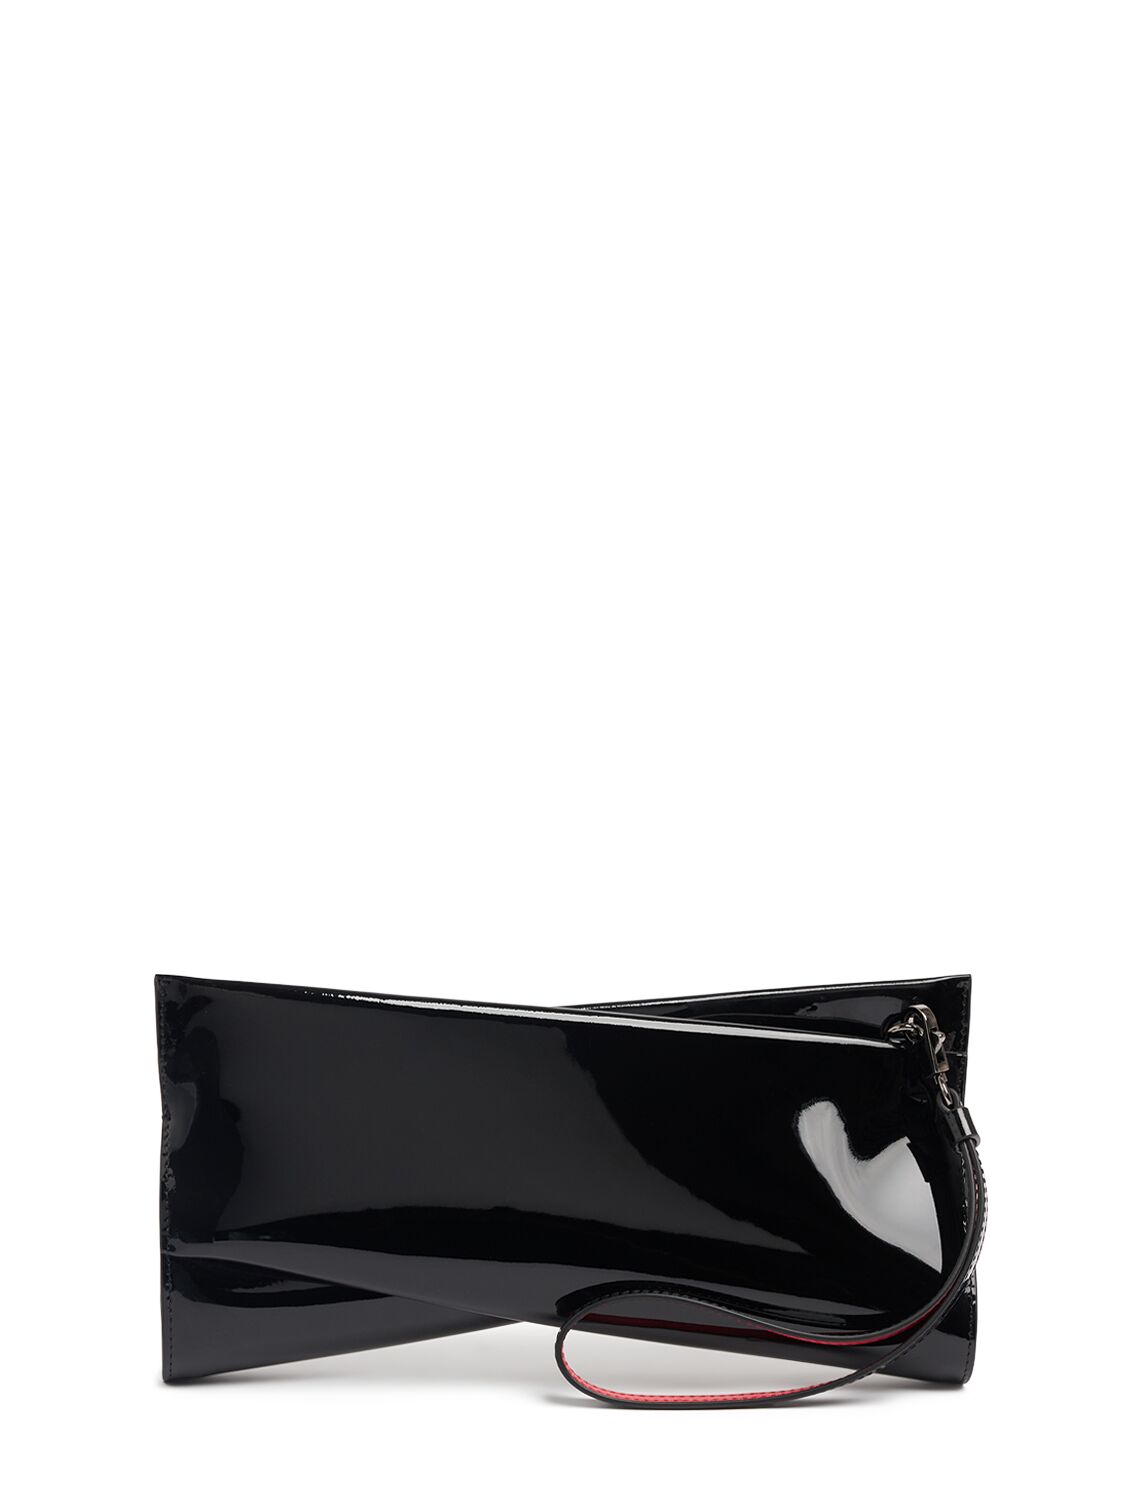 Christian Louboutin Loubitwist Patent Leather Clutch In Black